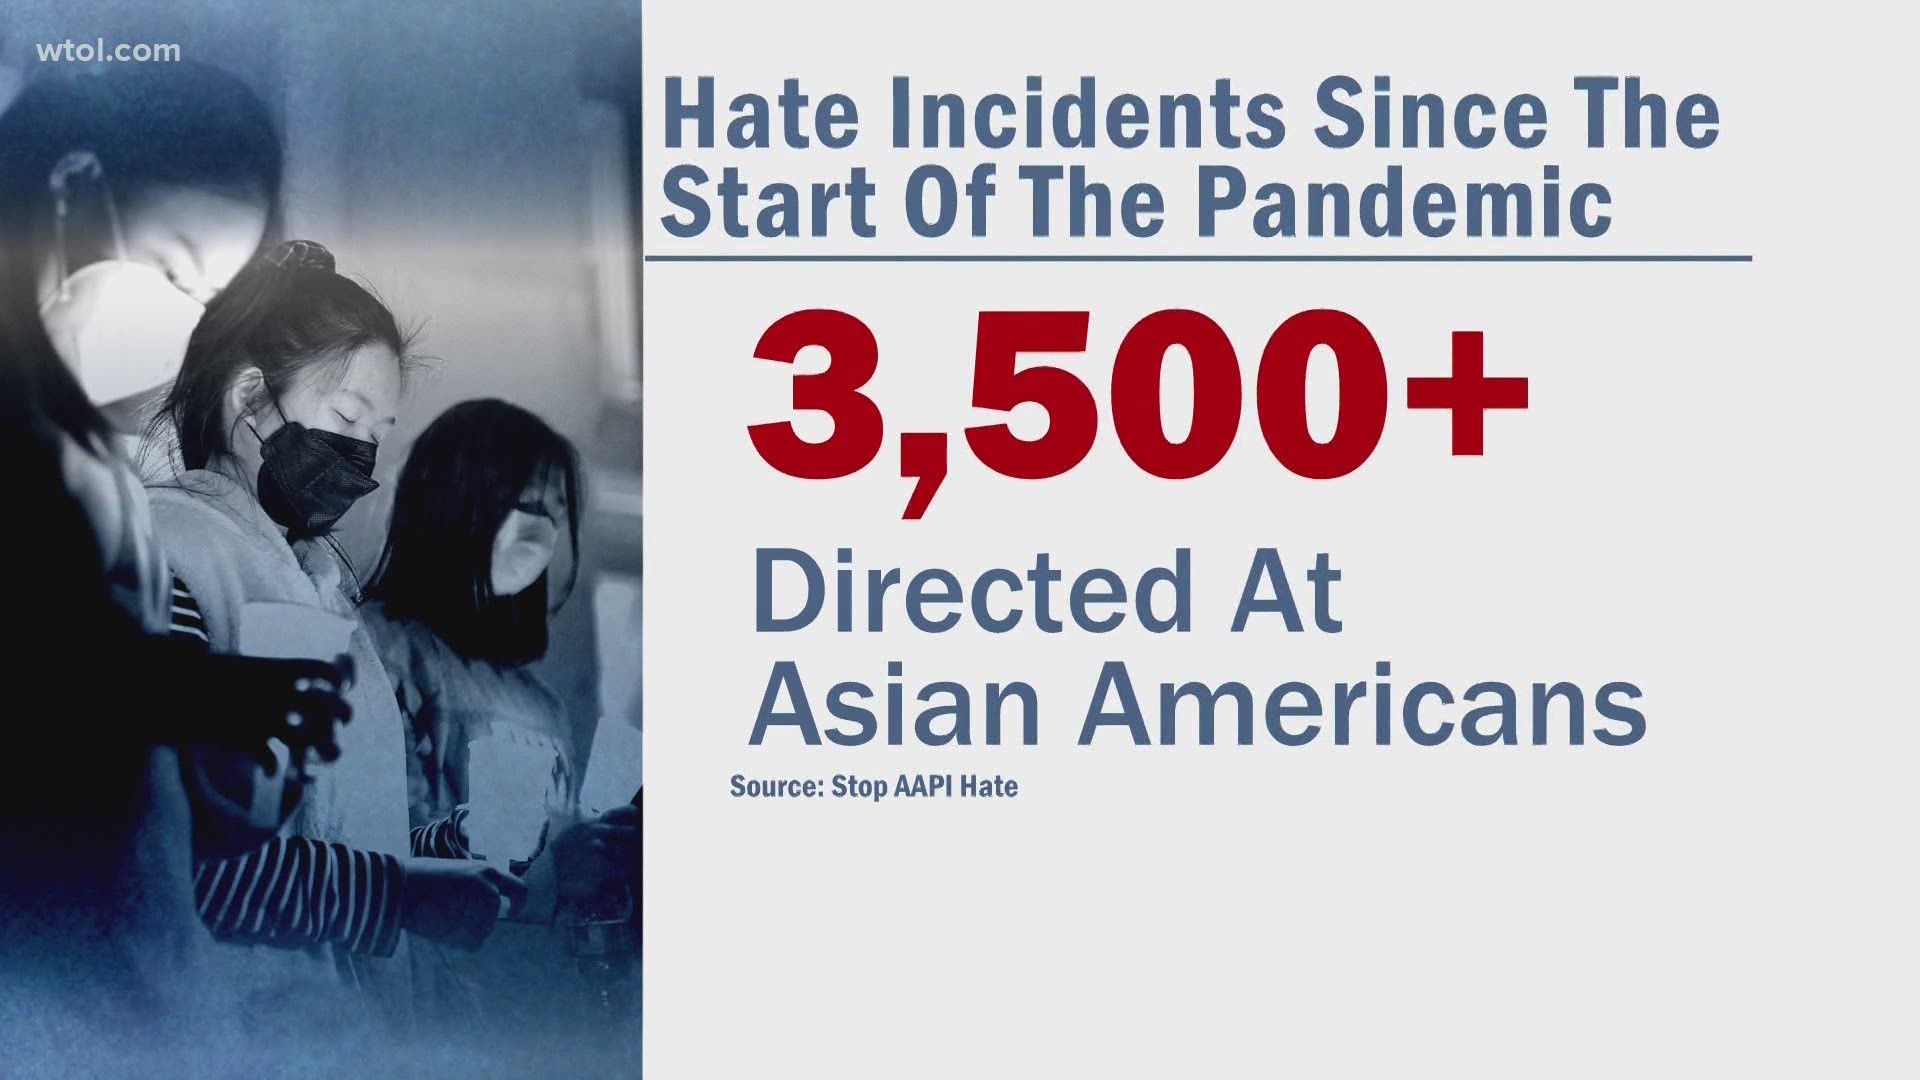 Students and staff at the University of Toledo share experiences with hatred toward the AAPI community as the pandemic brings to light discrimination and violence.